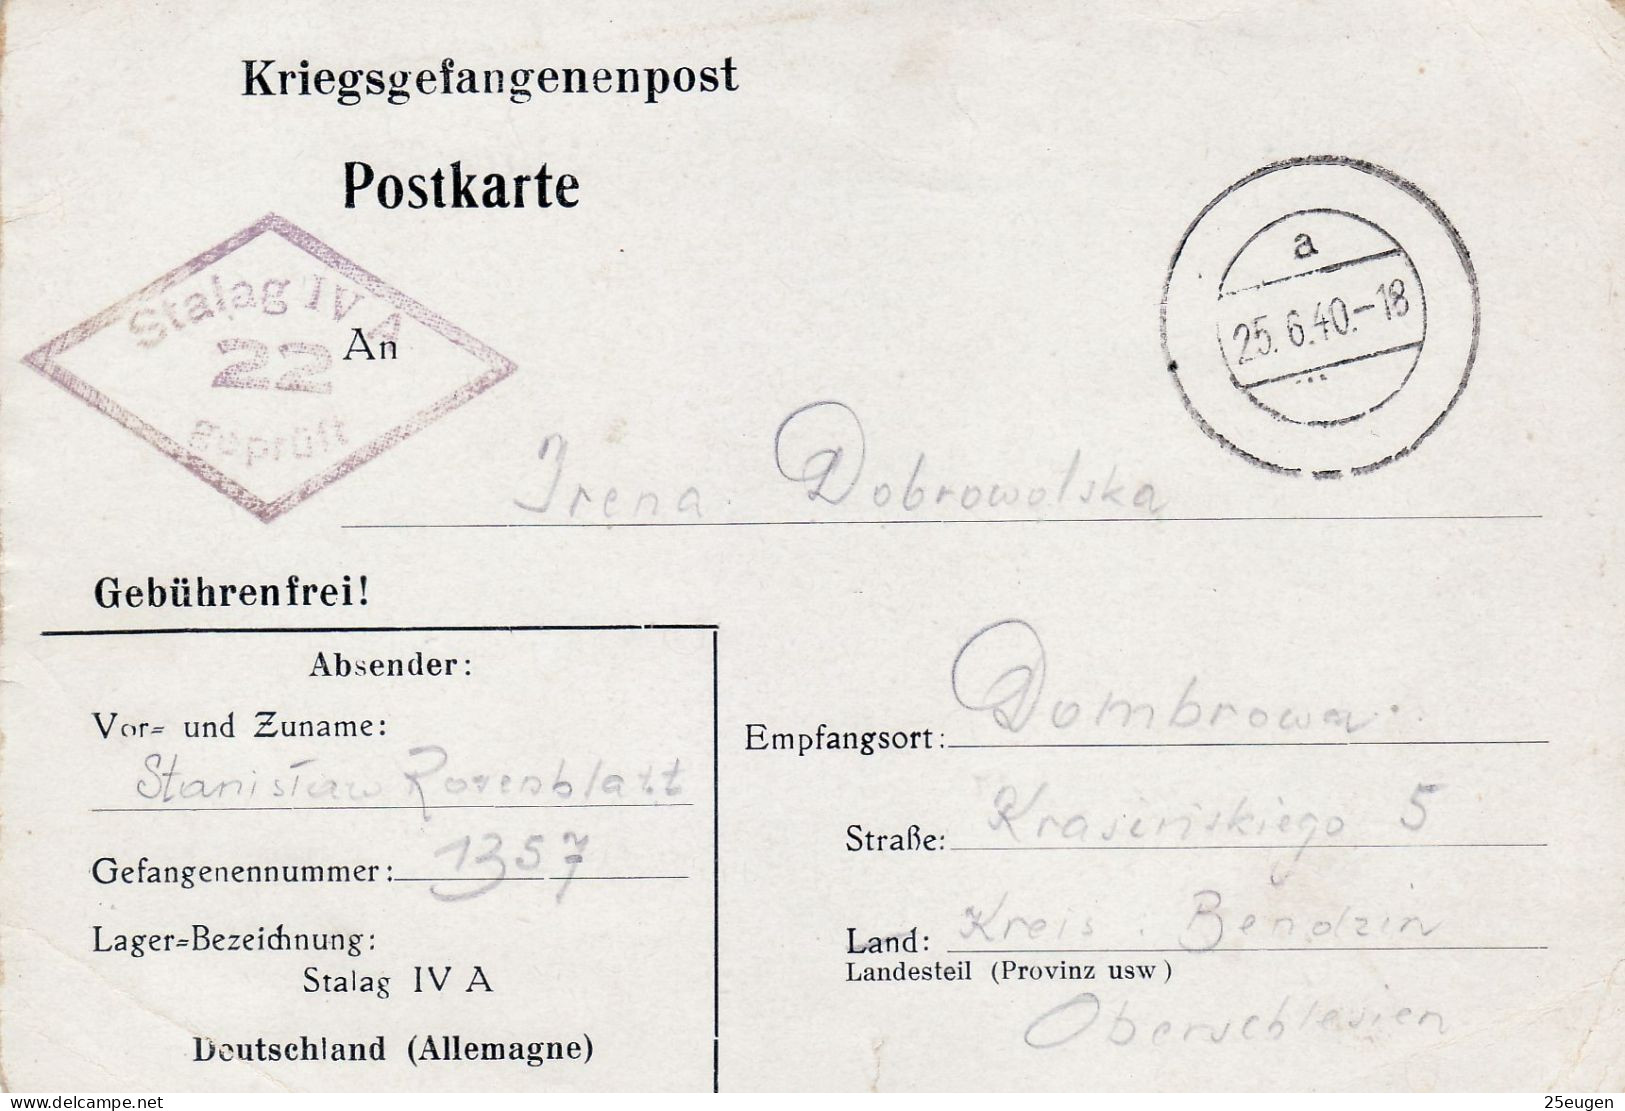 PRISONERS OF WAR MAIL 1940 POSTCARD SENT FROM STALAG IV A  TO DOMBROWA - Gevangenkampen